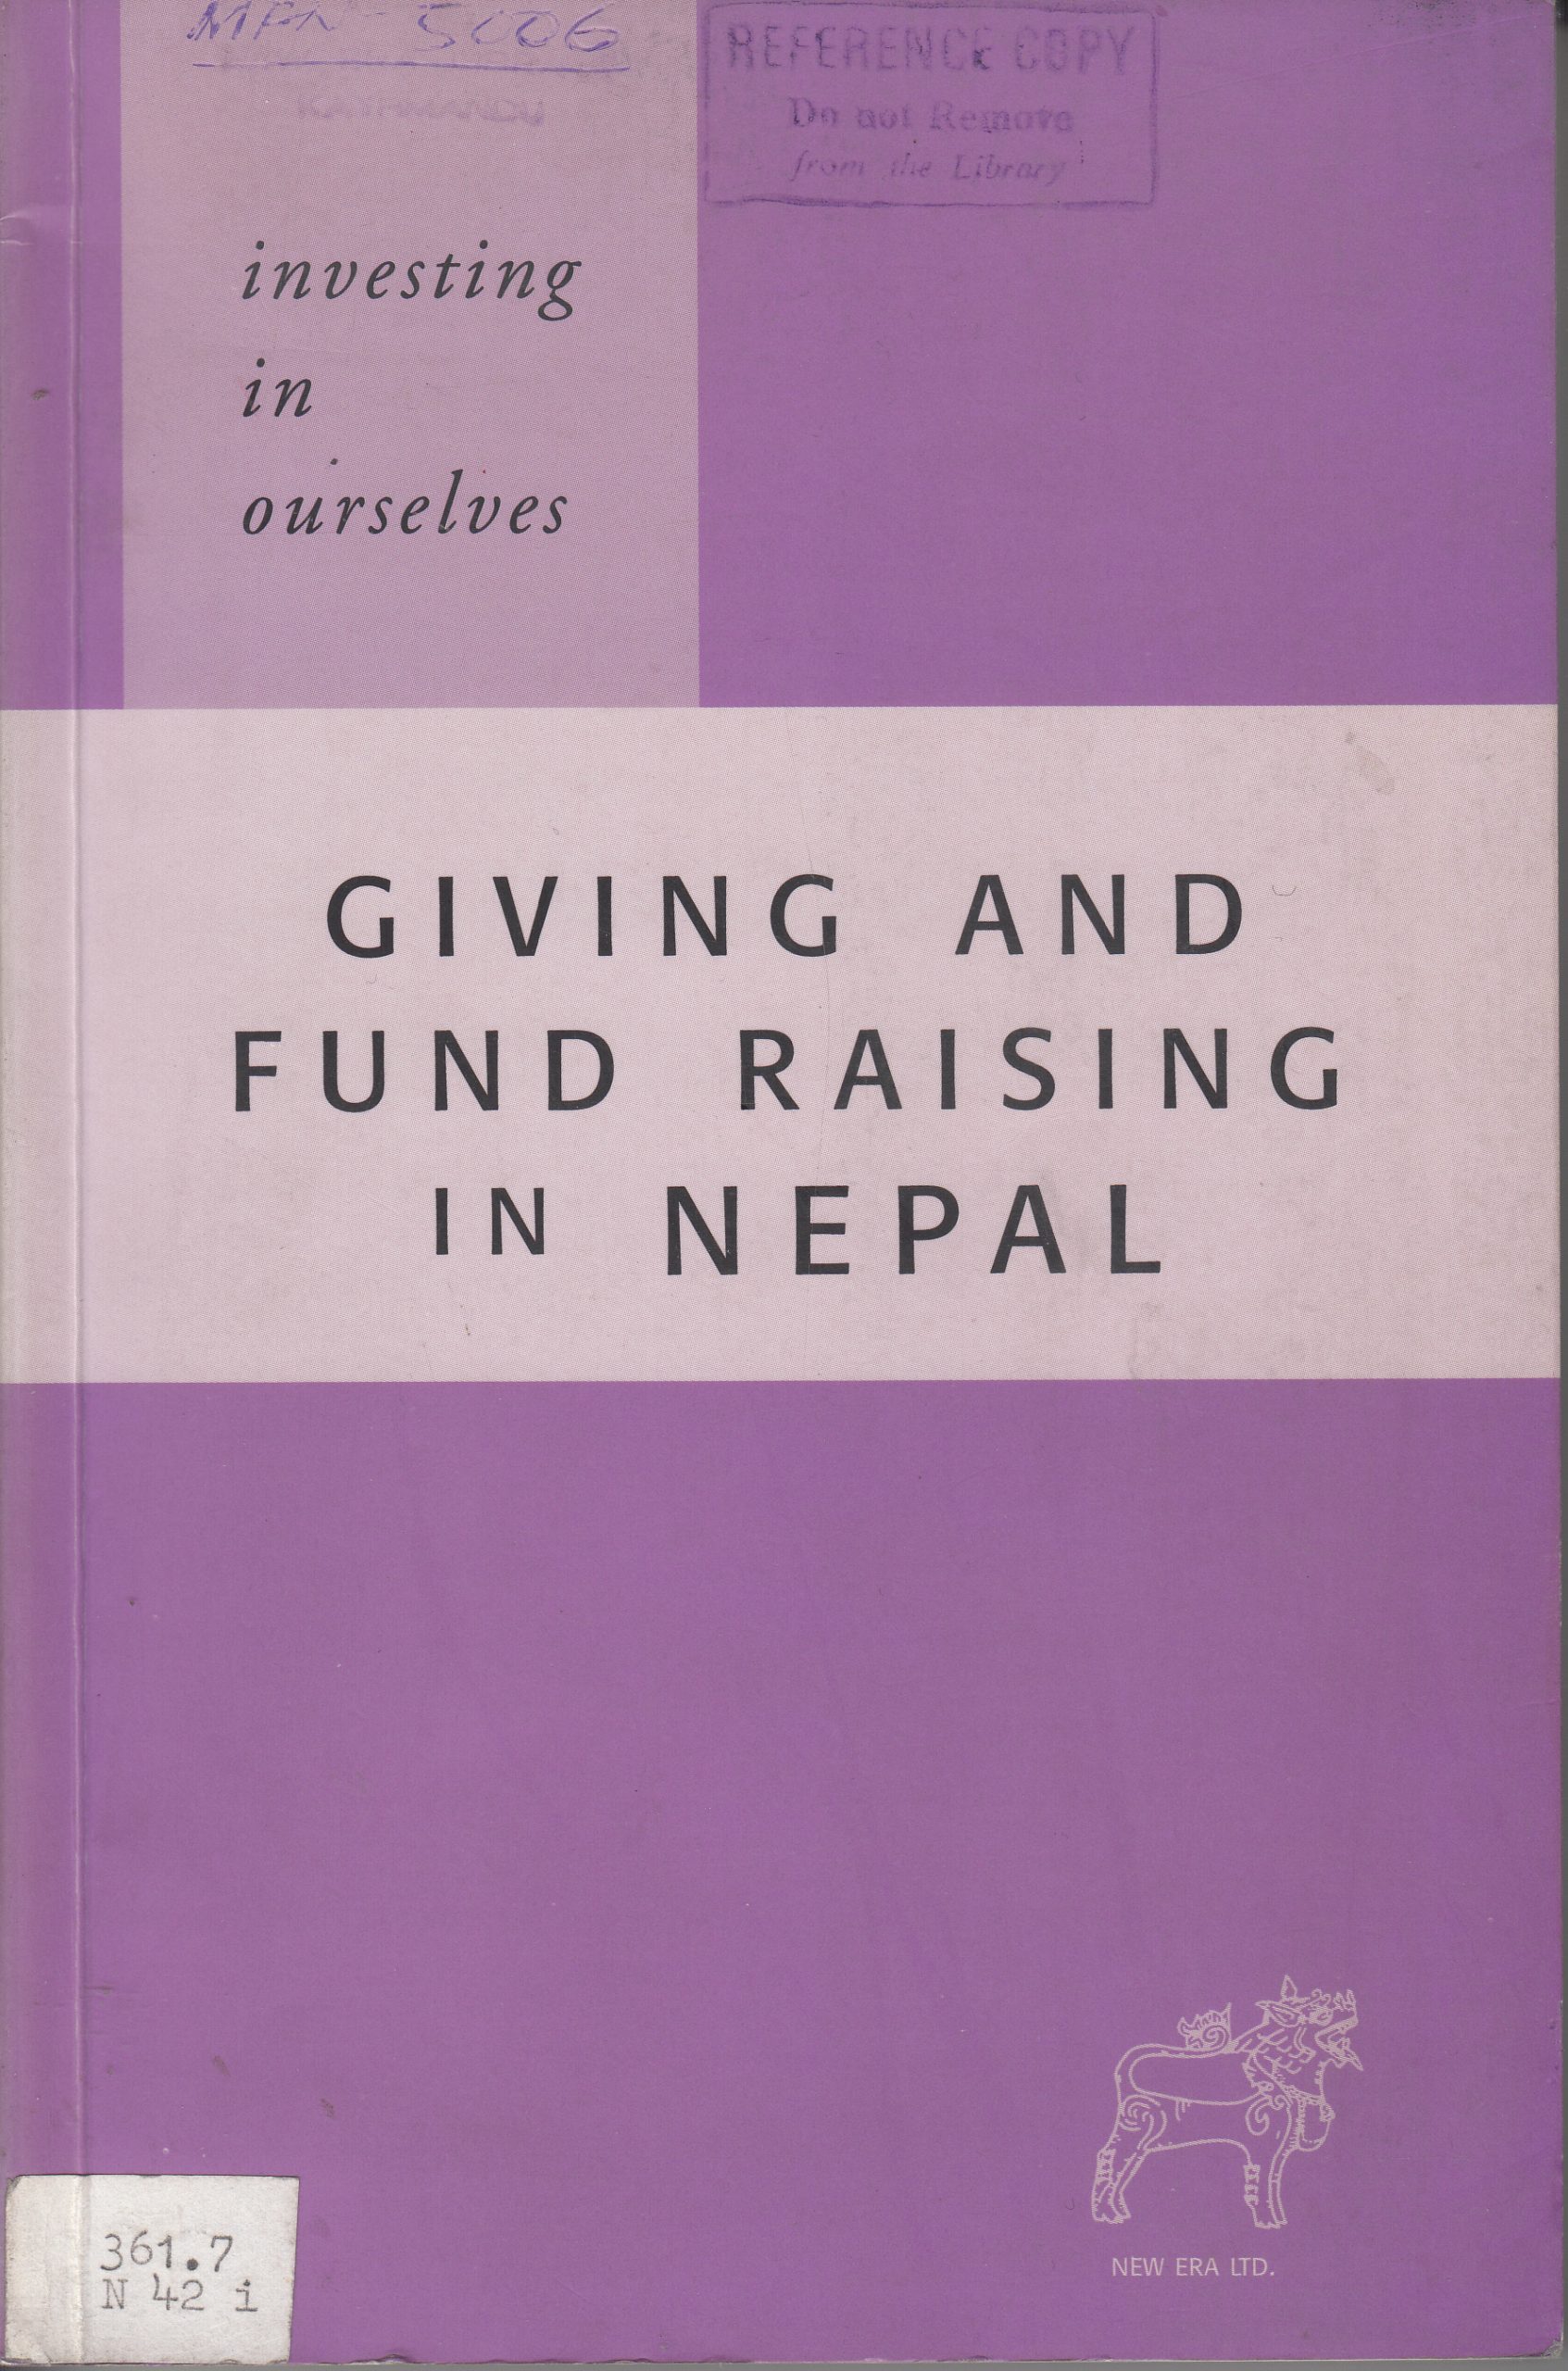 Investing in Ourselves: Giving and Fund Raising in Nepal